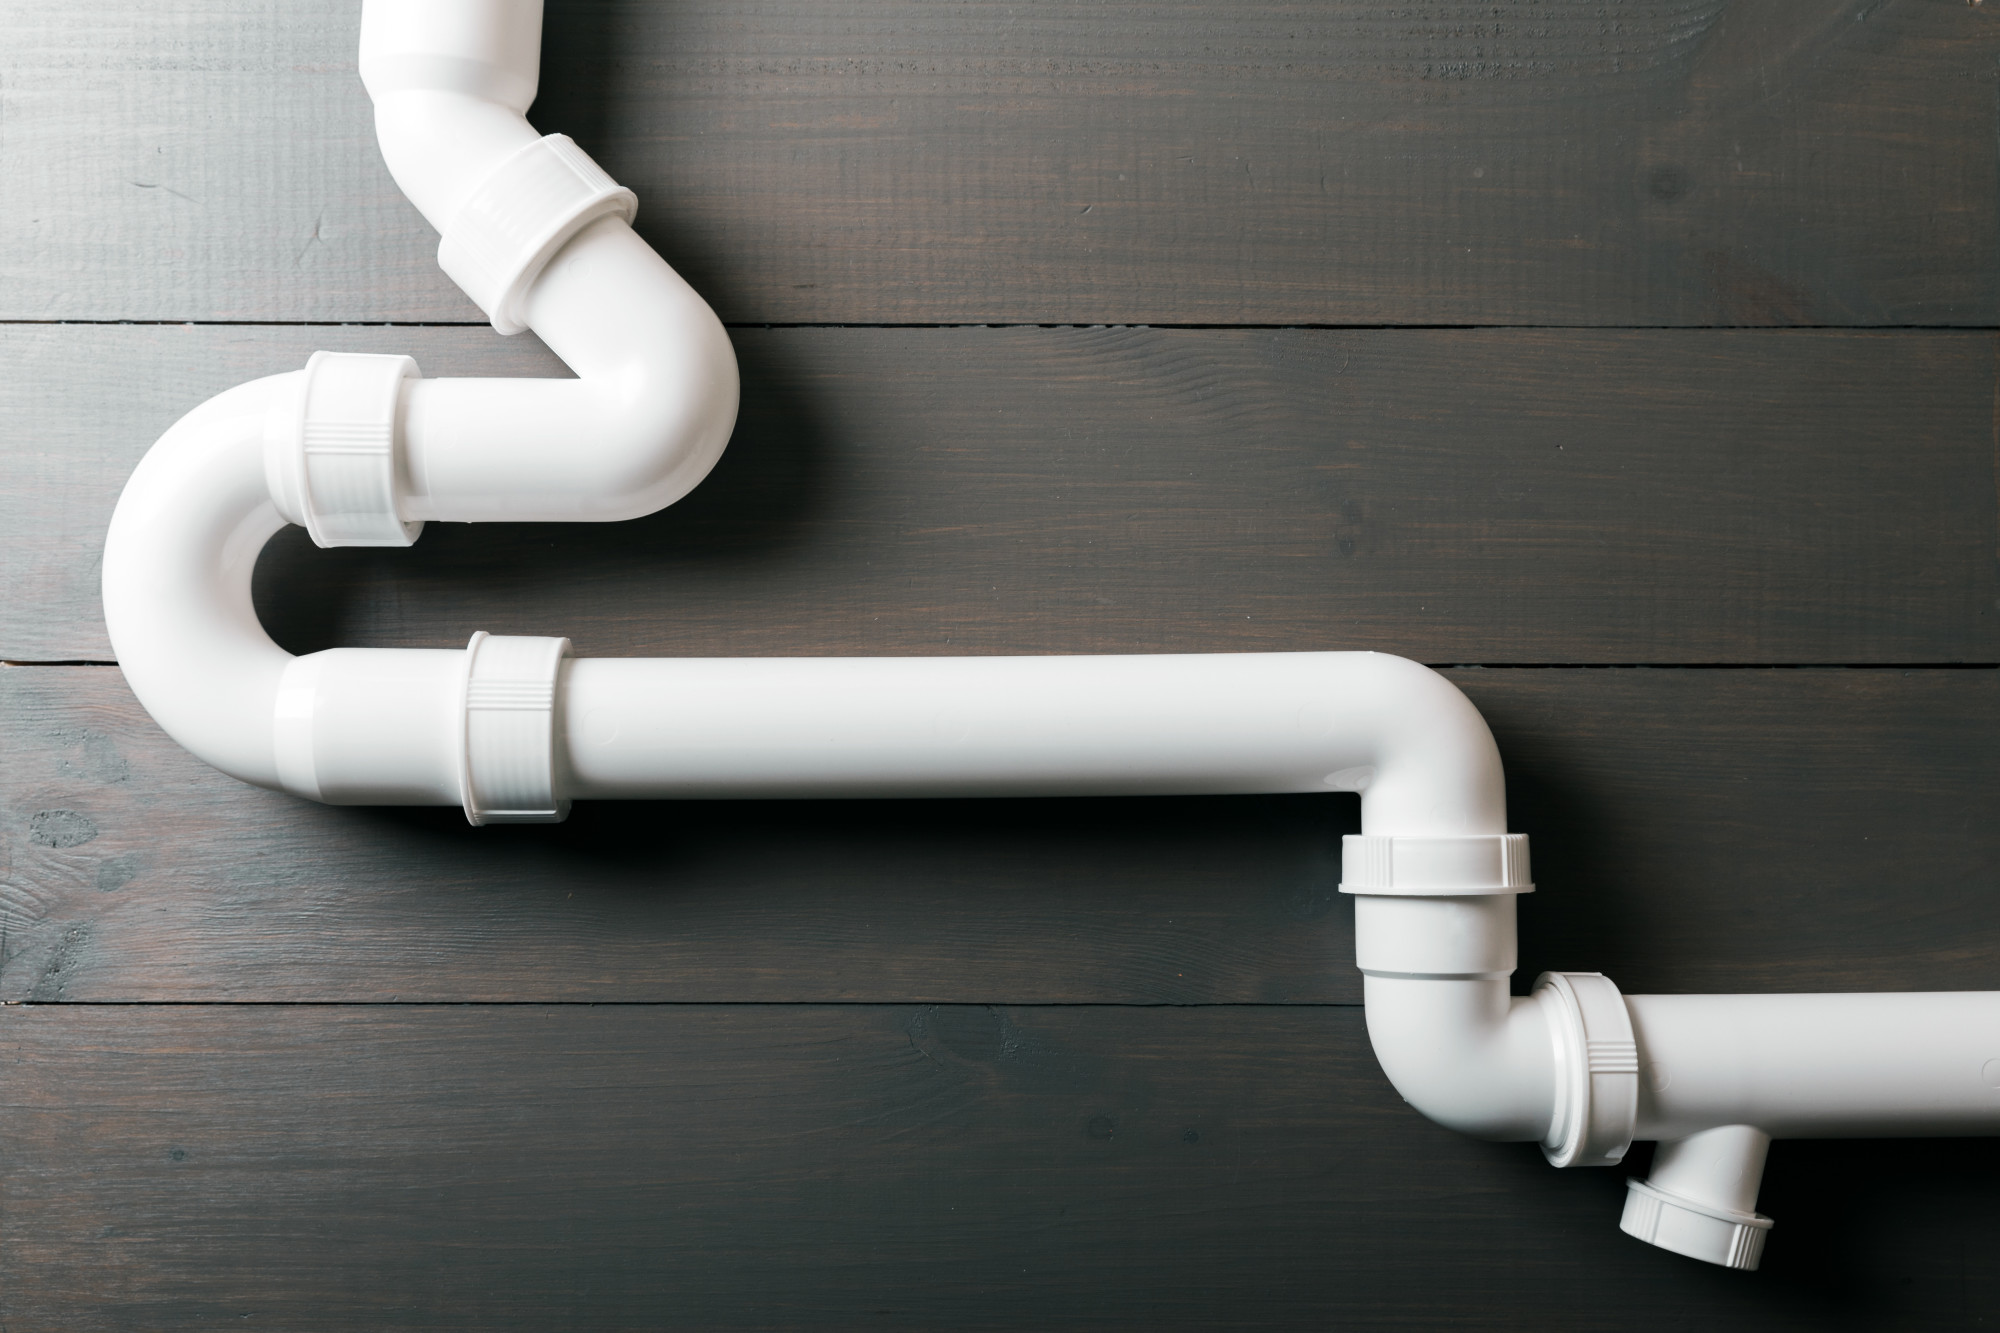 Pipe cleaning at home can help extend the lifespan of your plumbing. Here's everything you need to know about the benefits of having your pipes cleaned.